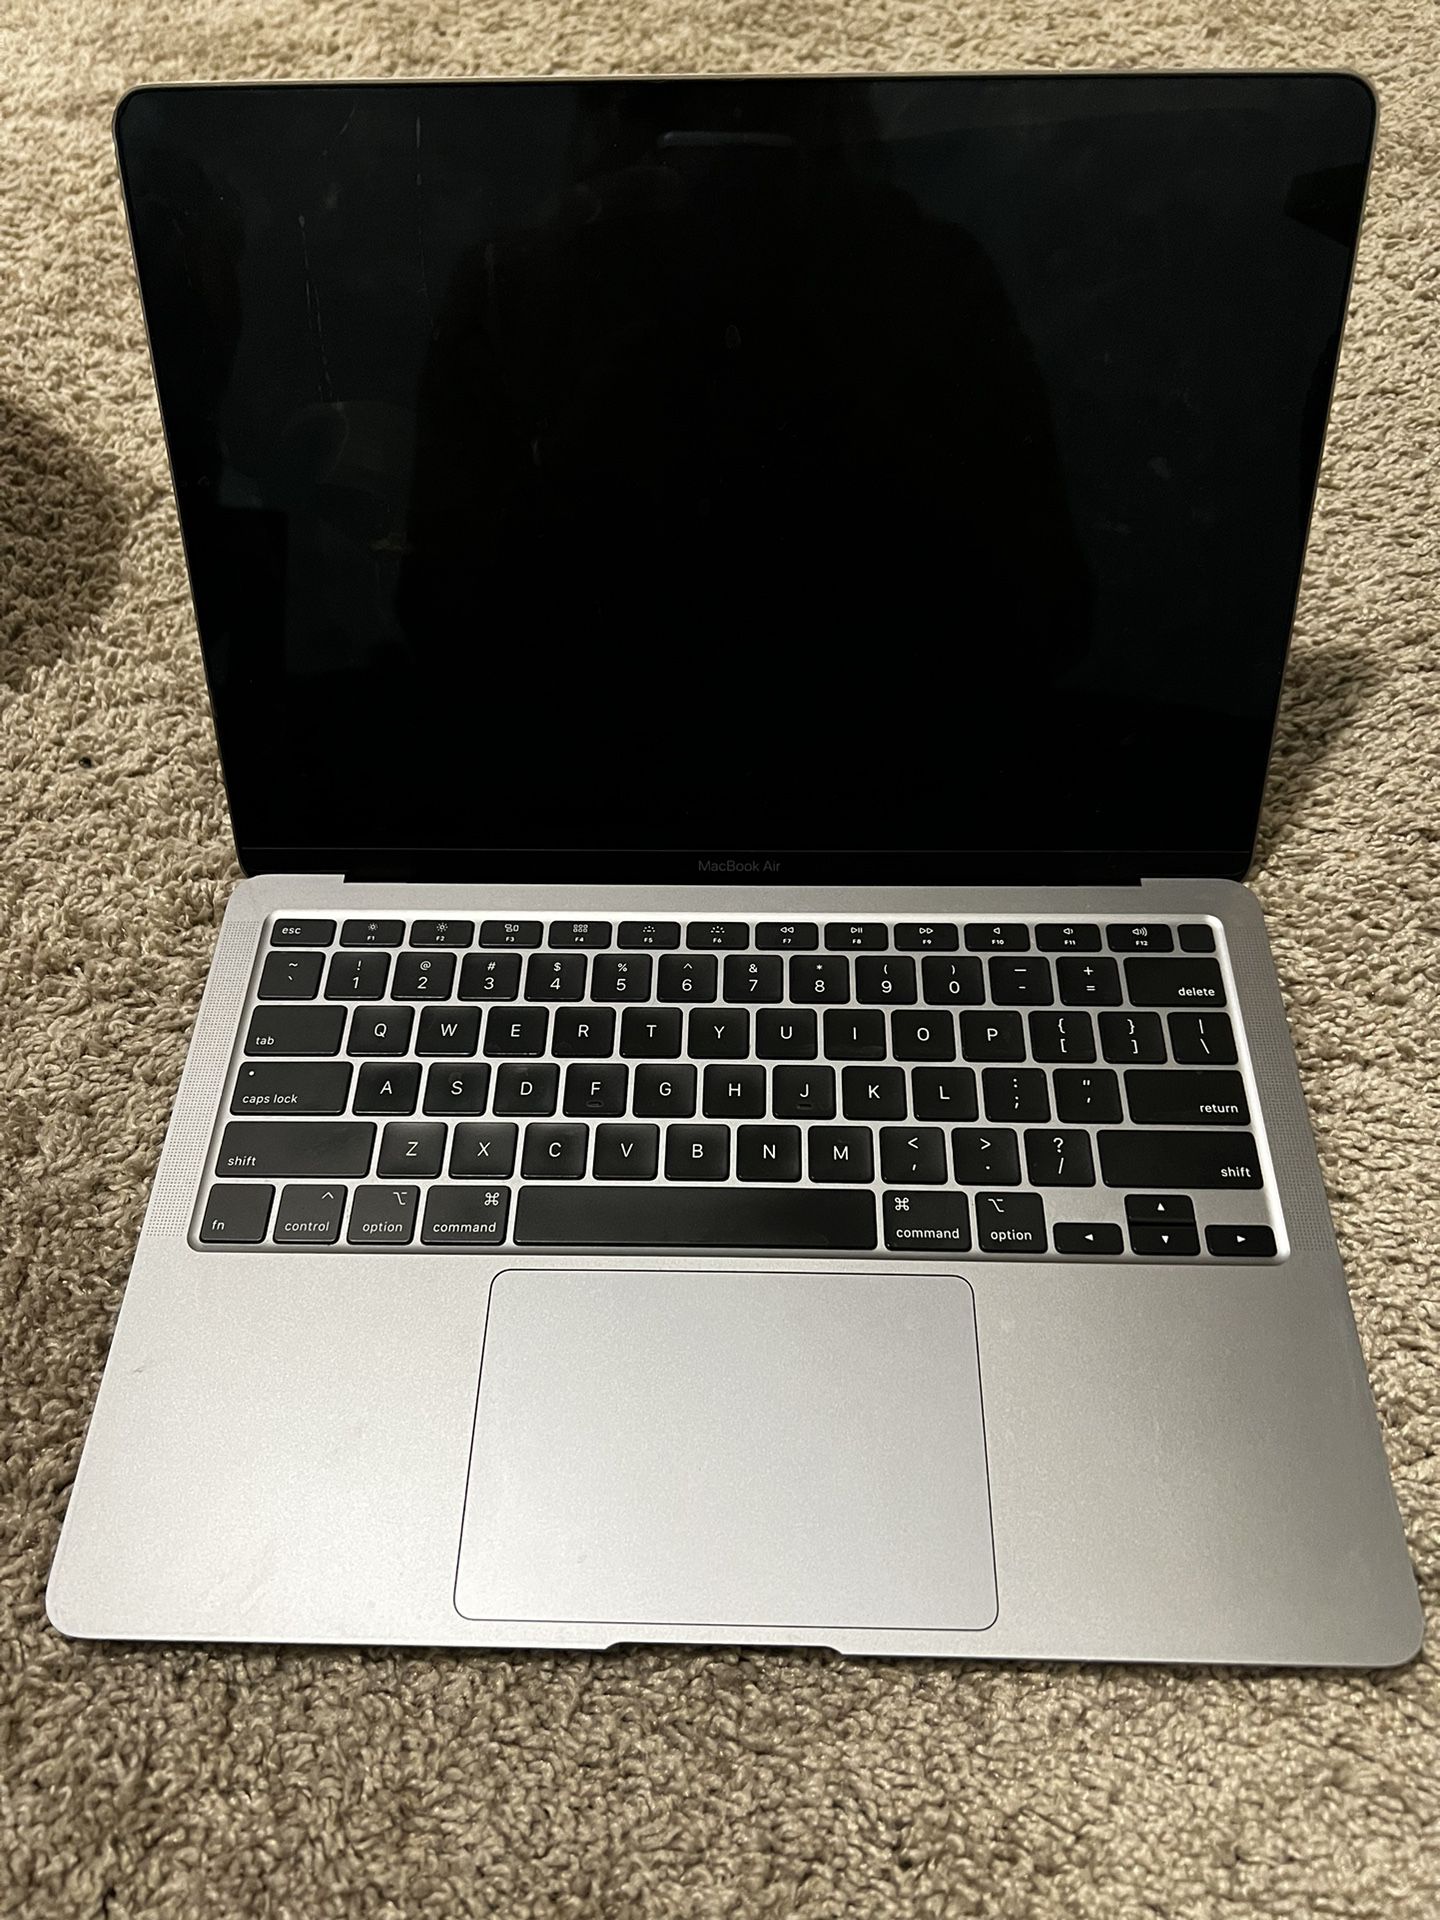 laptop (damaged) selling for parts